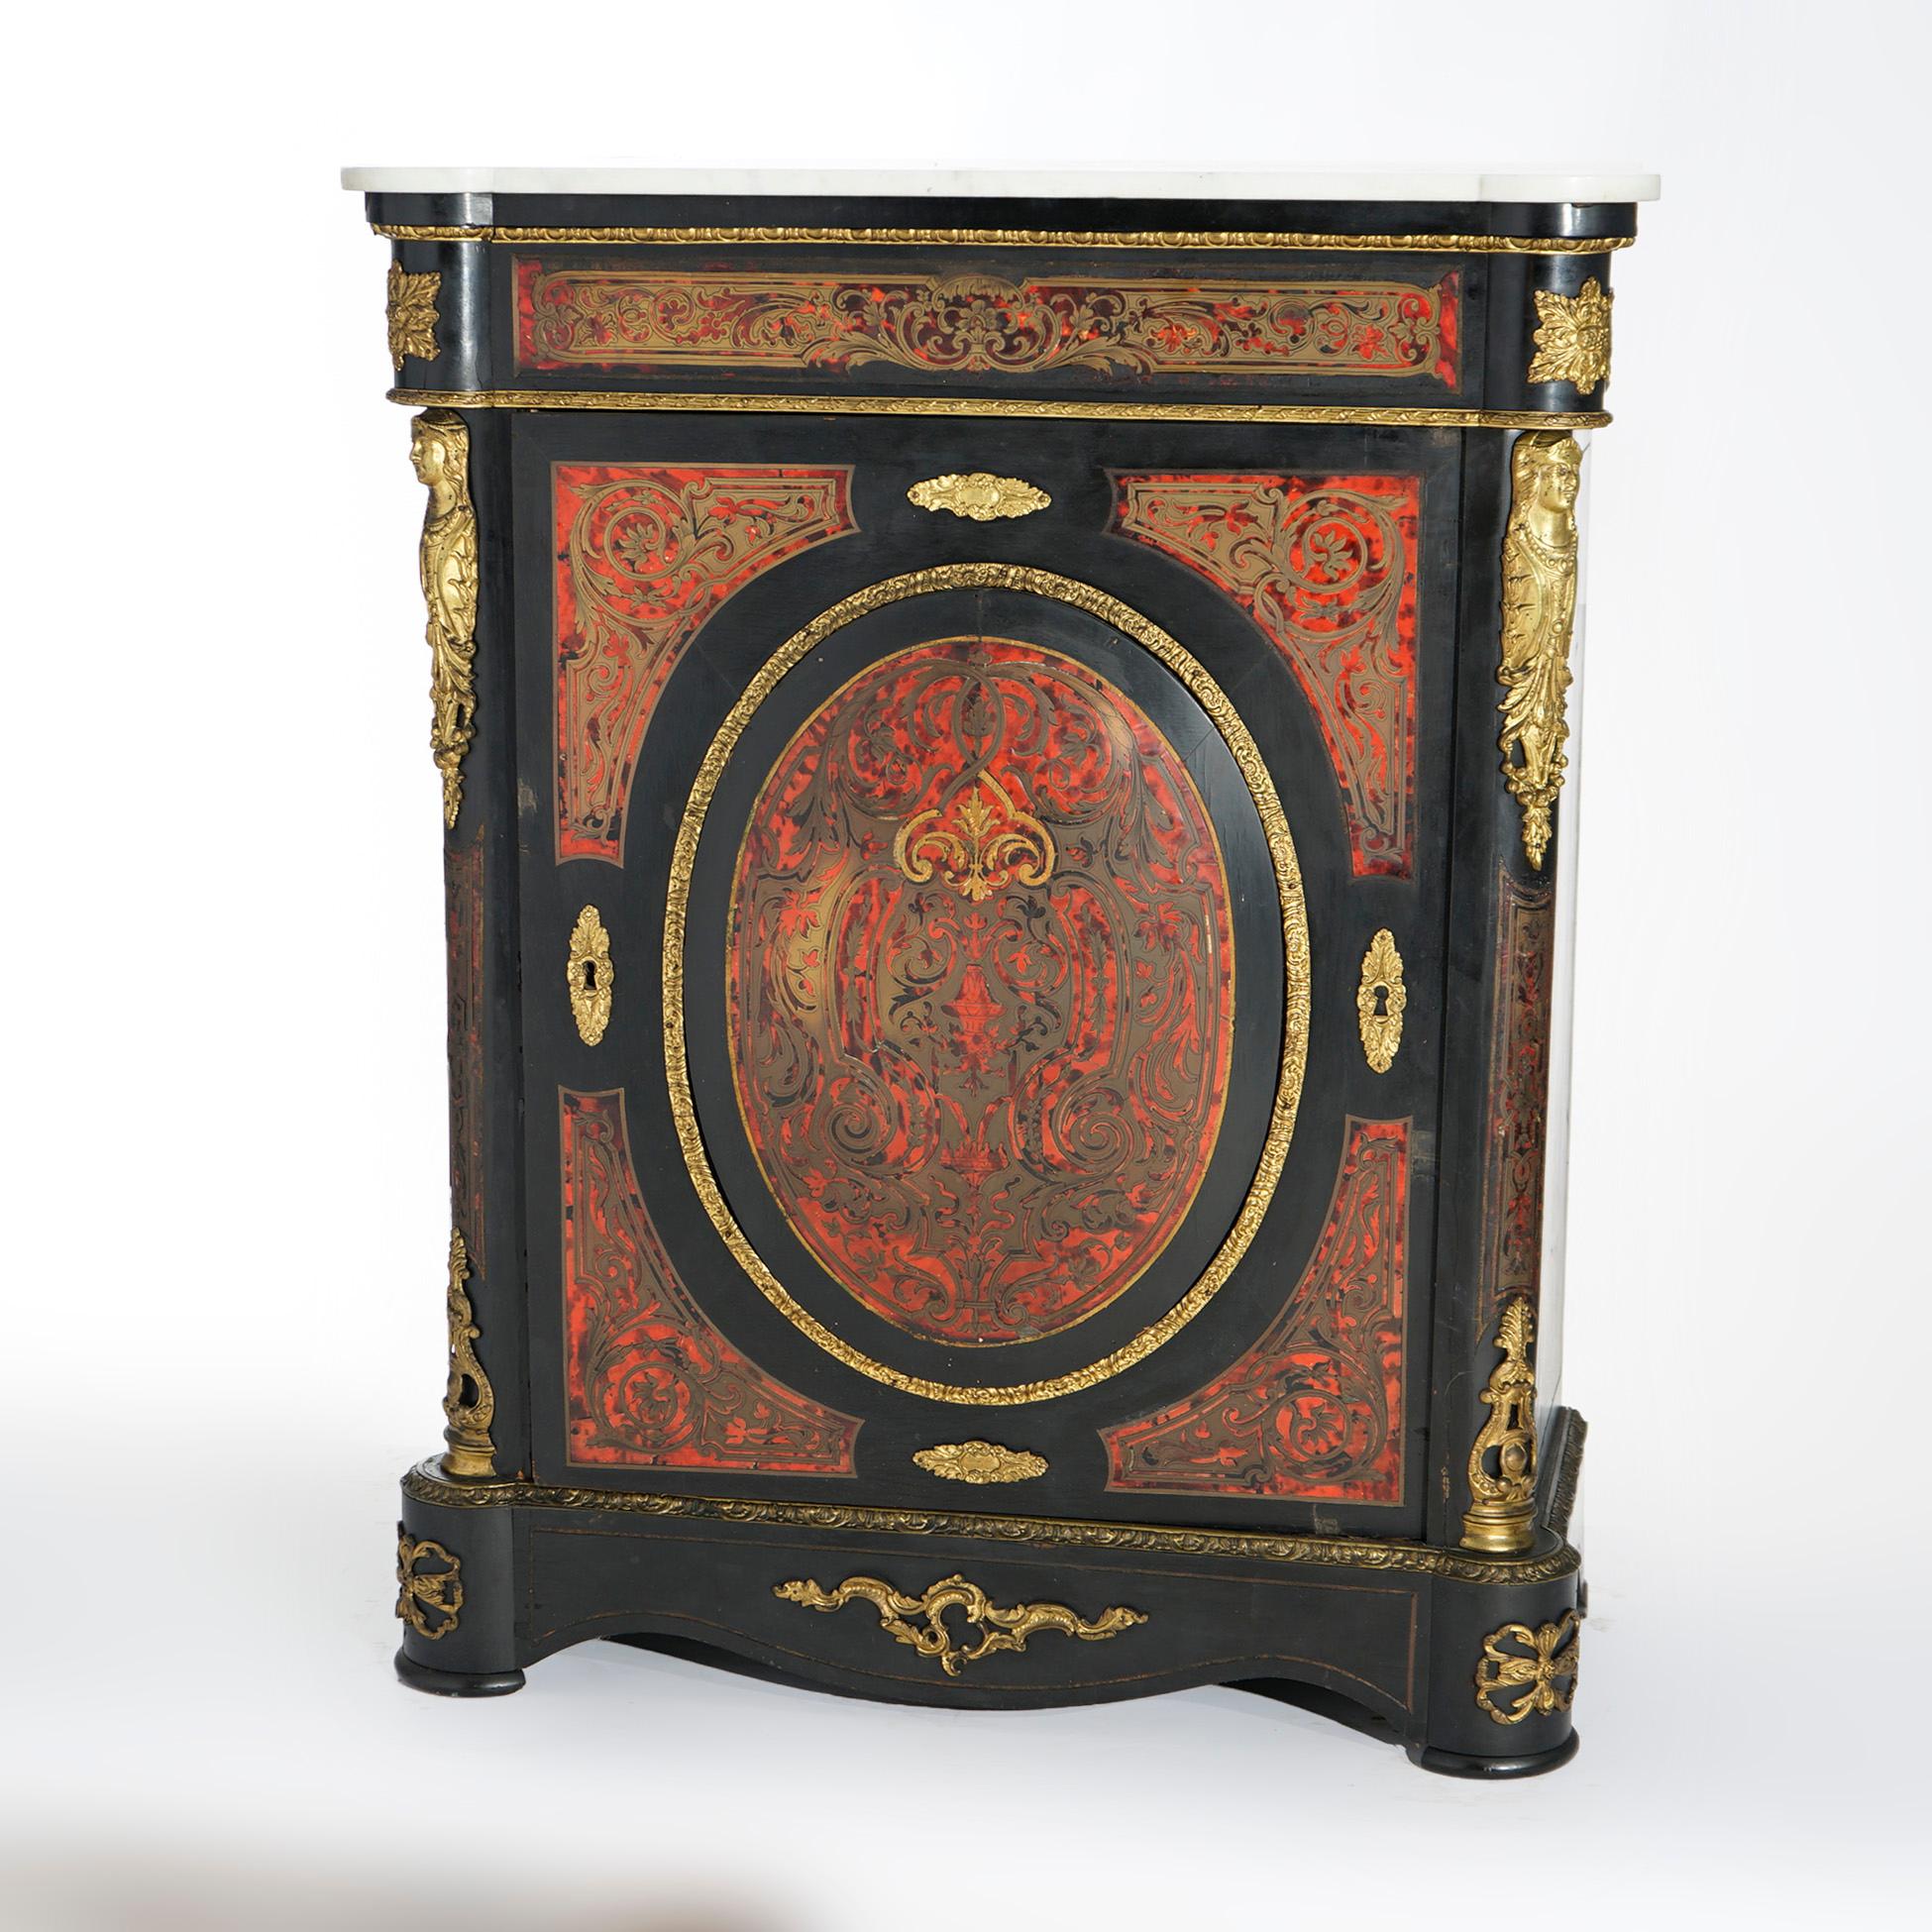 An antique French Empire credenza offers marble top over ebonized cabinet having Boulle decoration throughout, single door opening to shelved interior and ormolu mounts to include figural female caryatids, 19th century

Measures- 41''H x 33.25''W